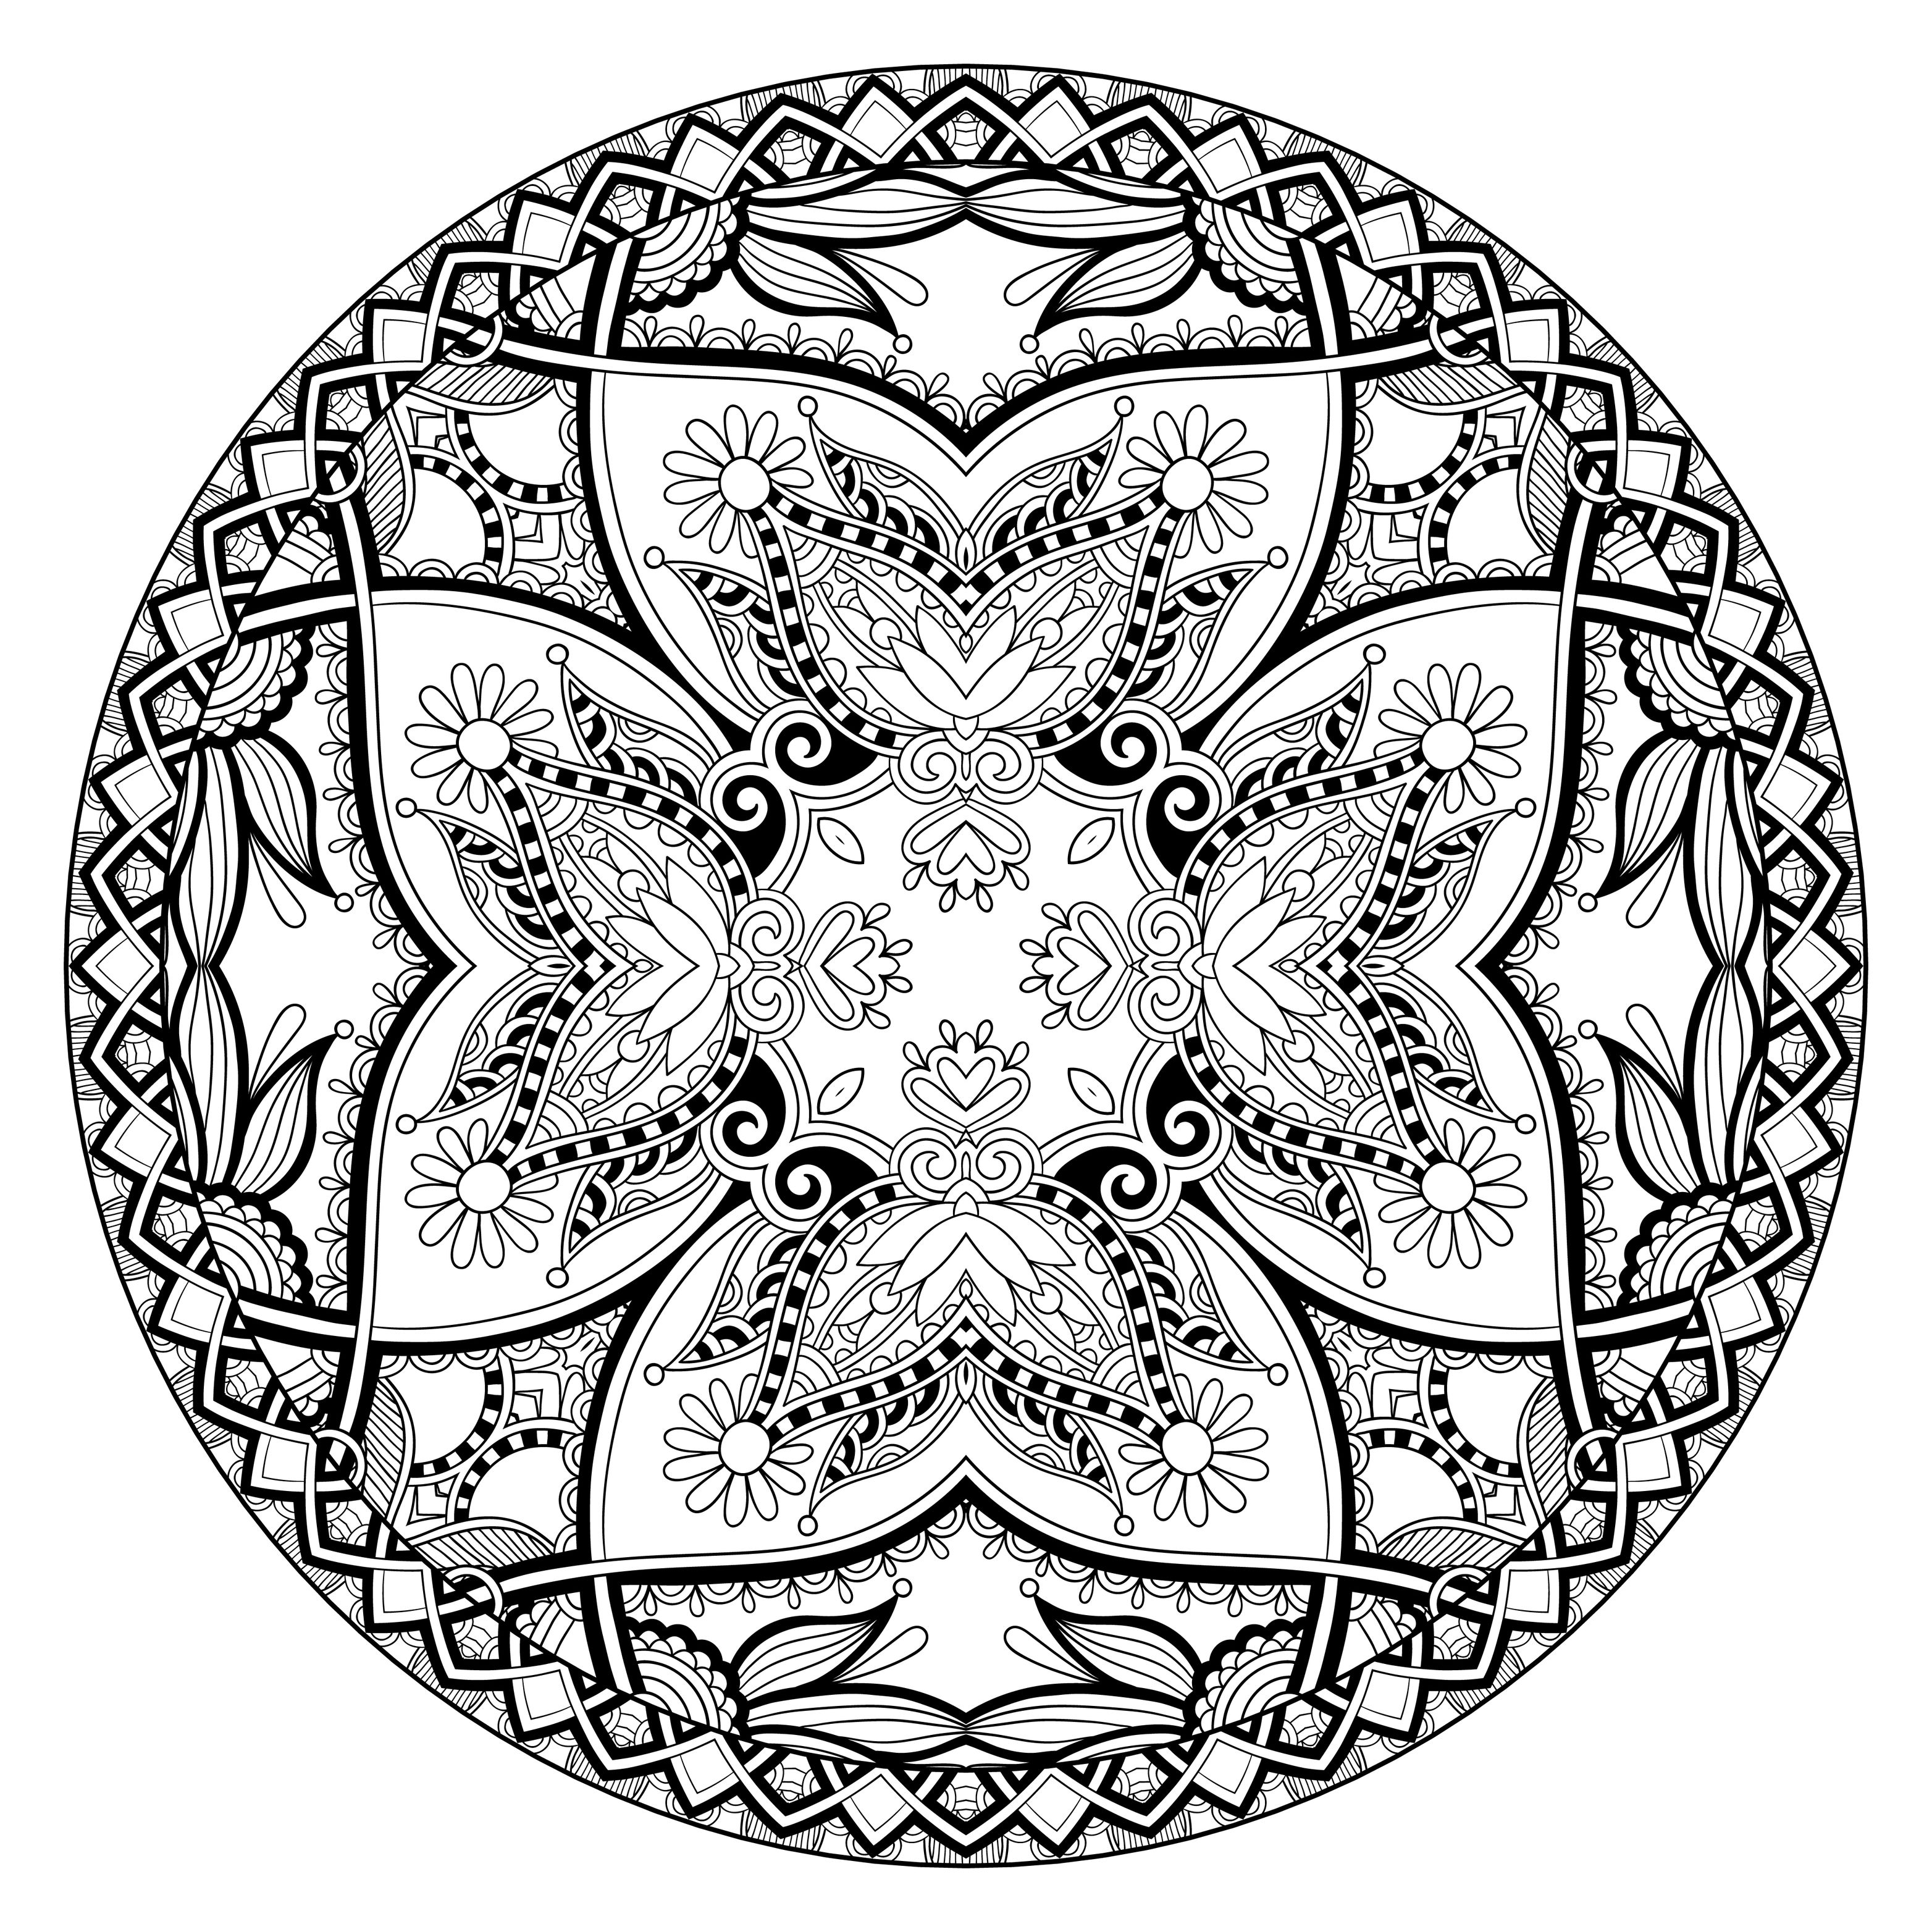 Very complex Mandala drawing inspired by vegetal elements, by Karakotsya. A luxuriant vegetation invades this magnificent Mandala, give it life without delay. Do whatever it takes to get rid of any distractions that may interfere with your coloring.